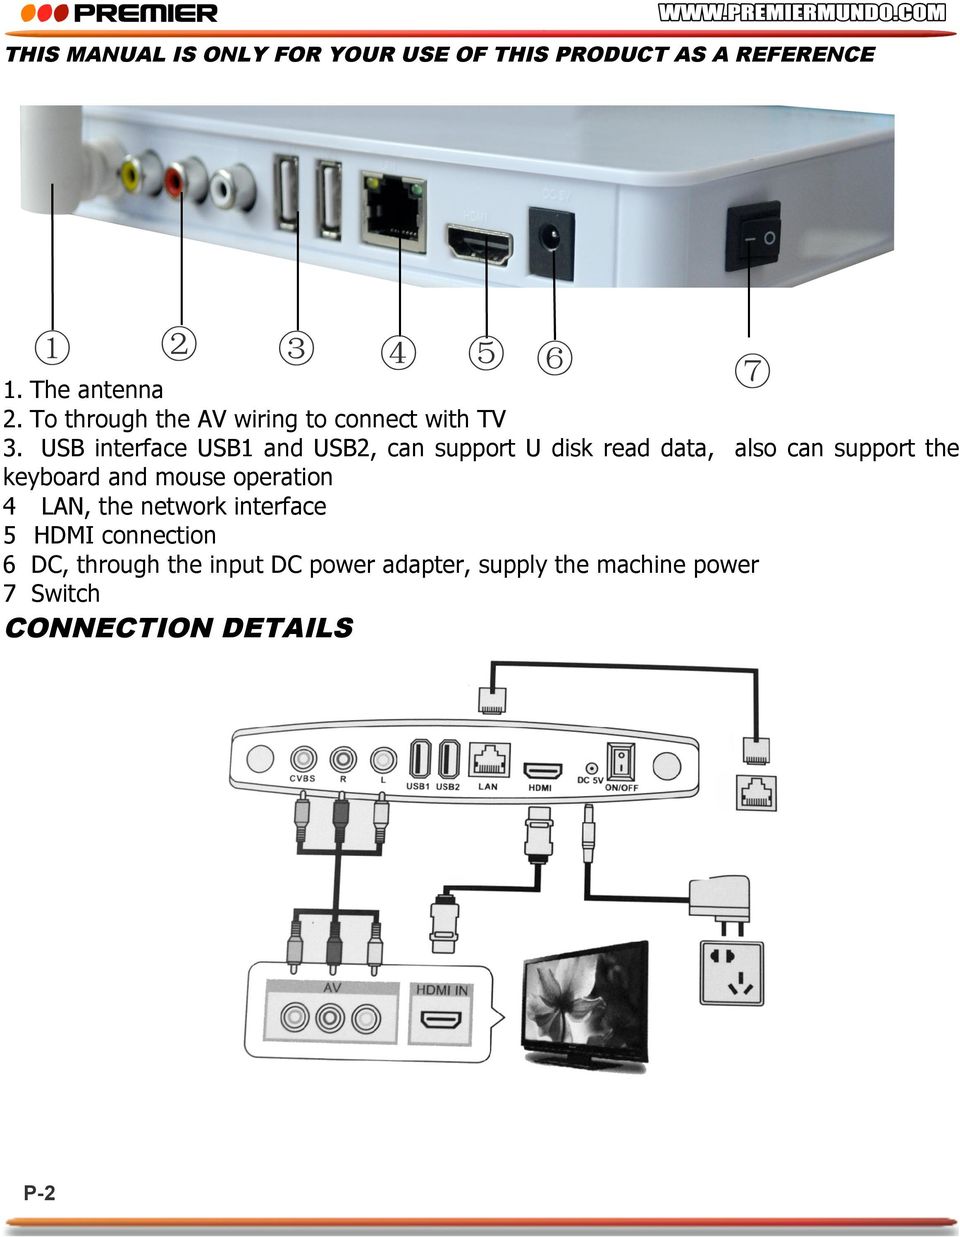 USB interface USB1 and USB2, can support U disk read data, also can support the keyboard and mouse